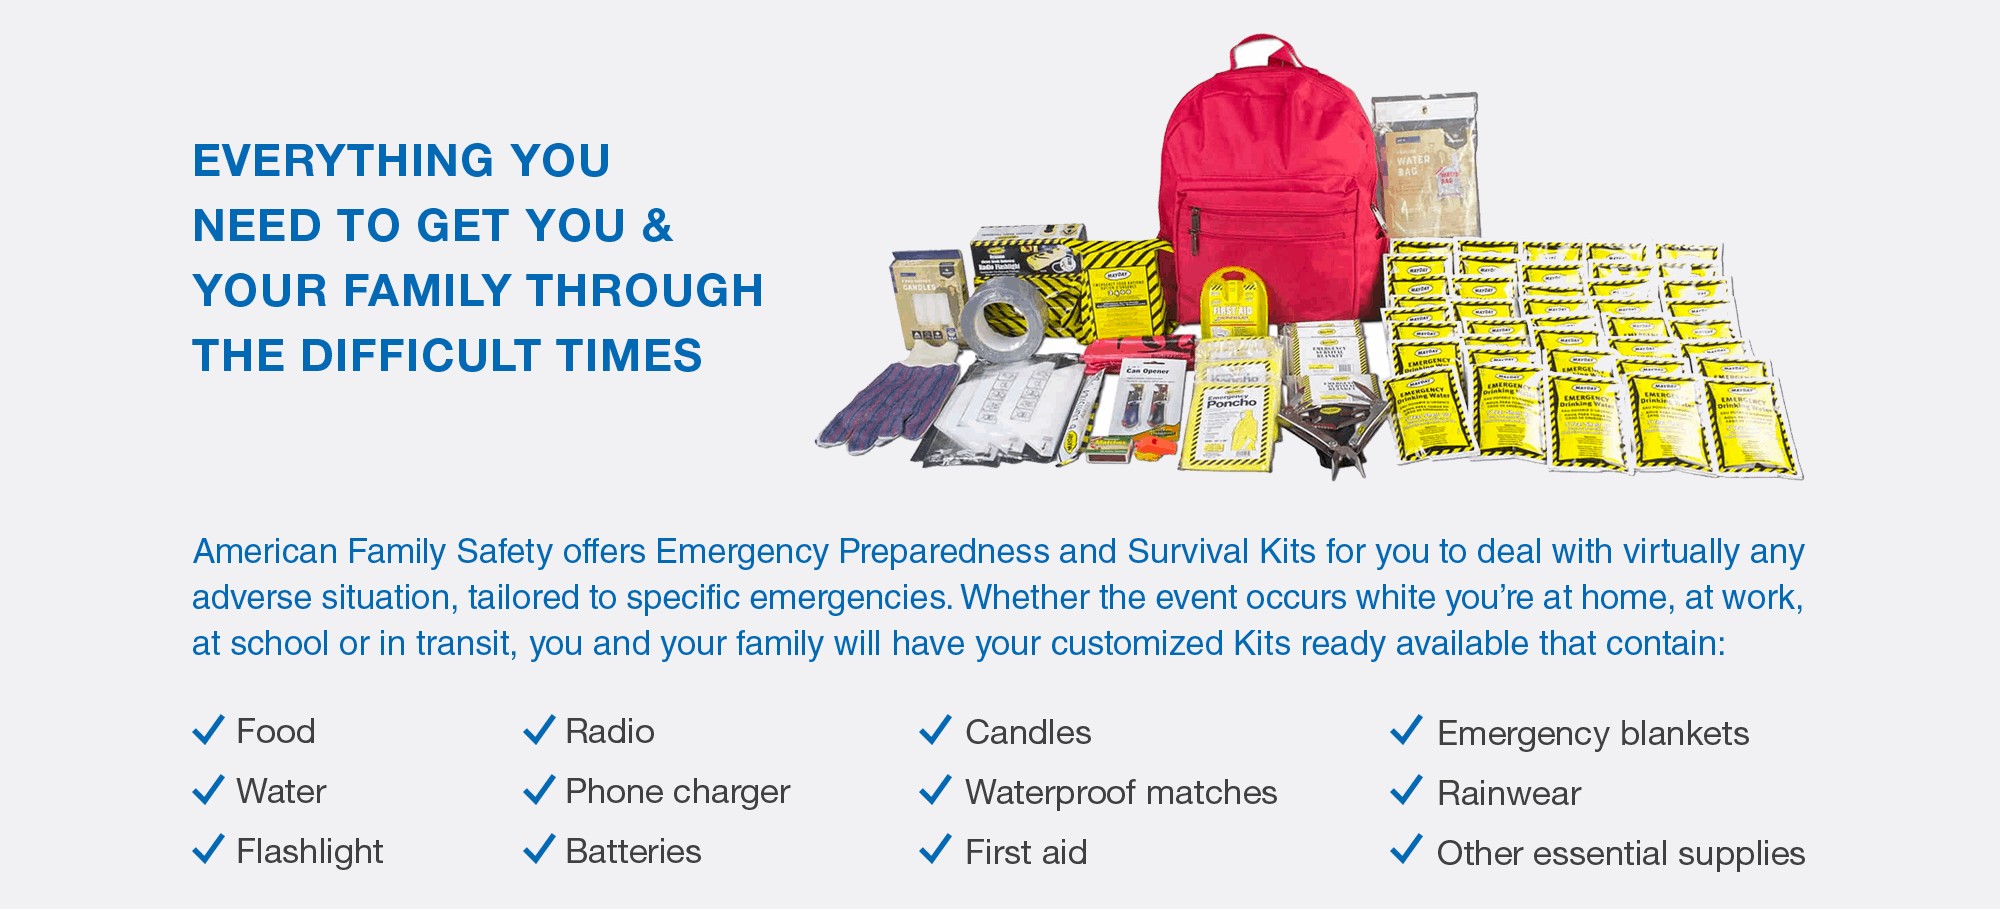 Ready for the Coronavirus? American Family Safety is the leading provider of EMERGENCY PREPAREDNESS KITS For Home, Office, School and Seniors